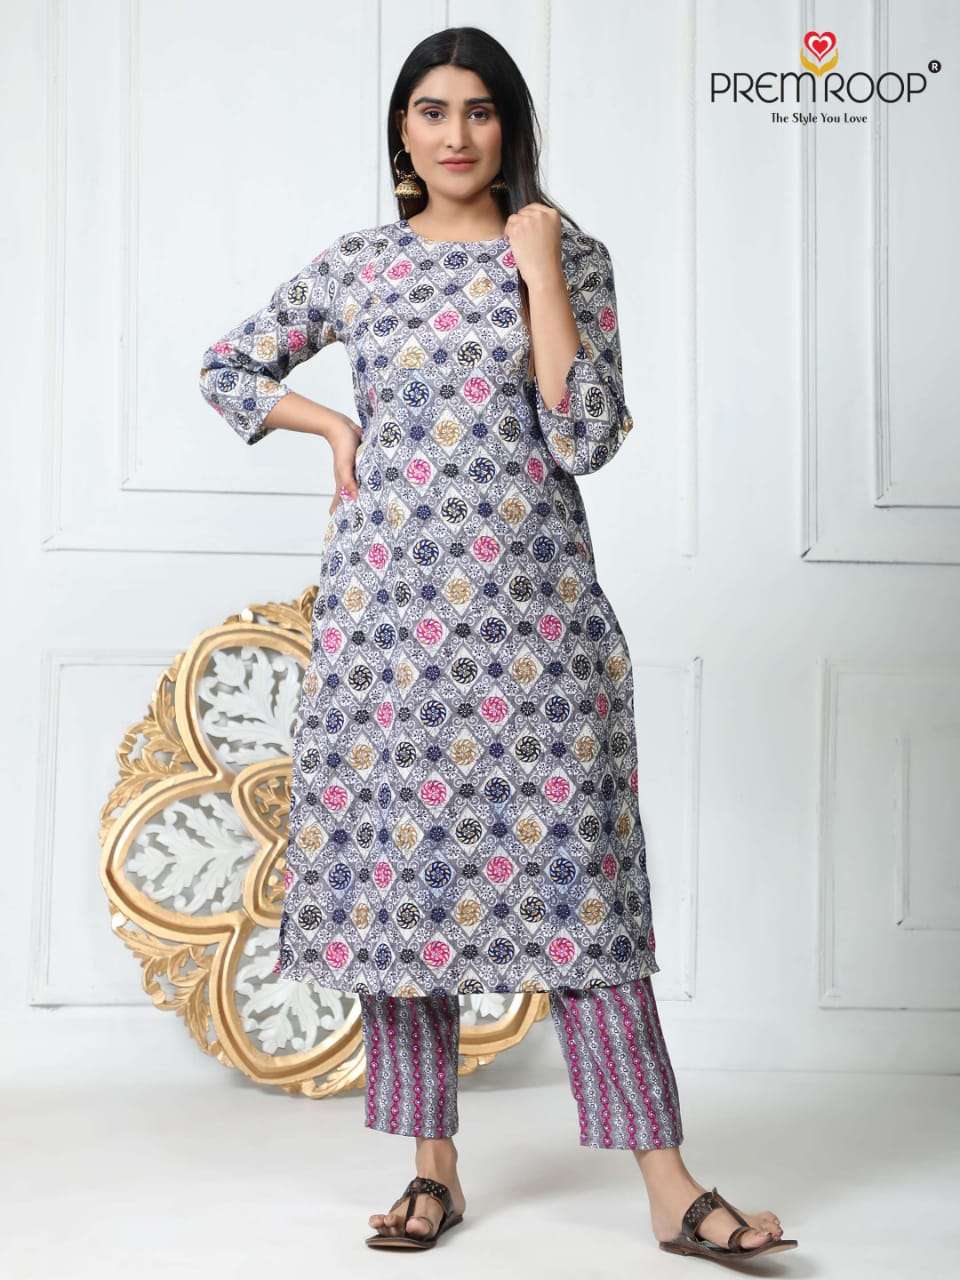 Premeroop Launches Kurti Pant Dupatta New Collection 